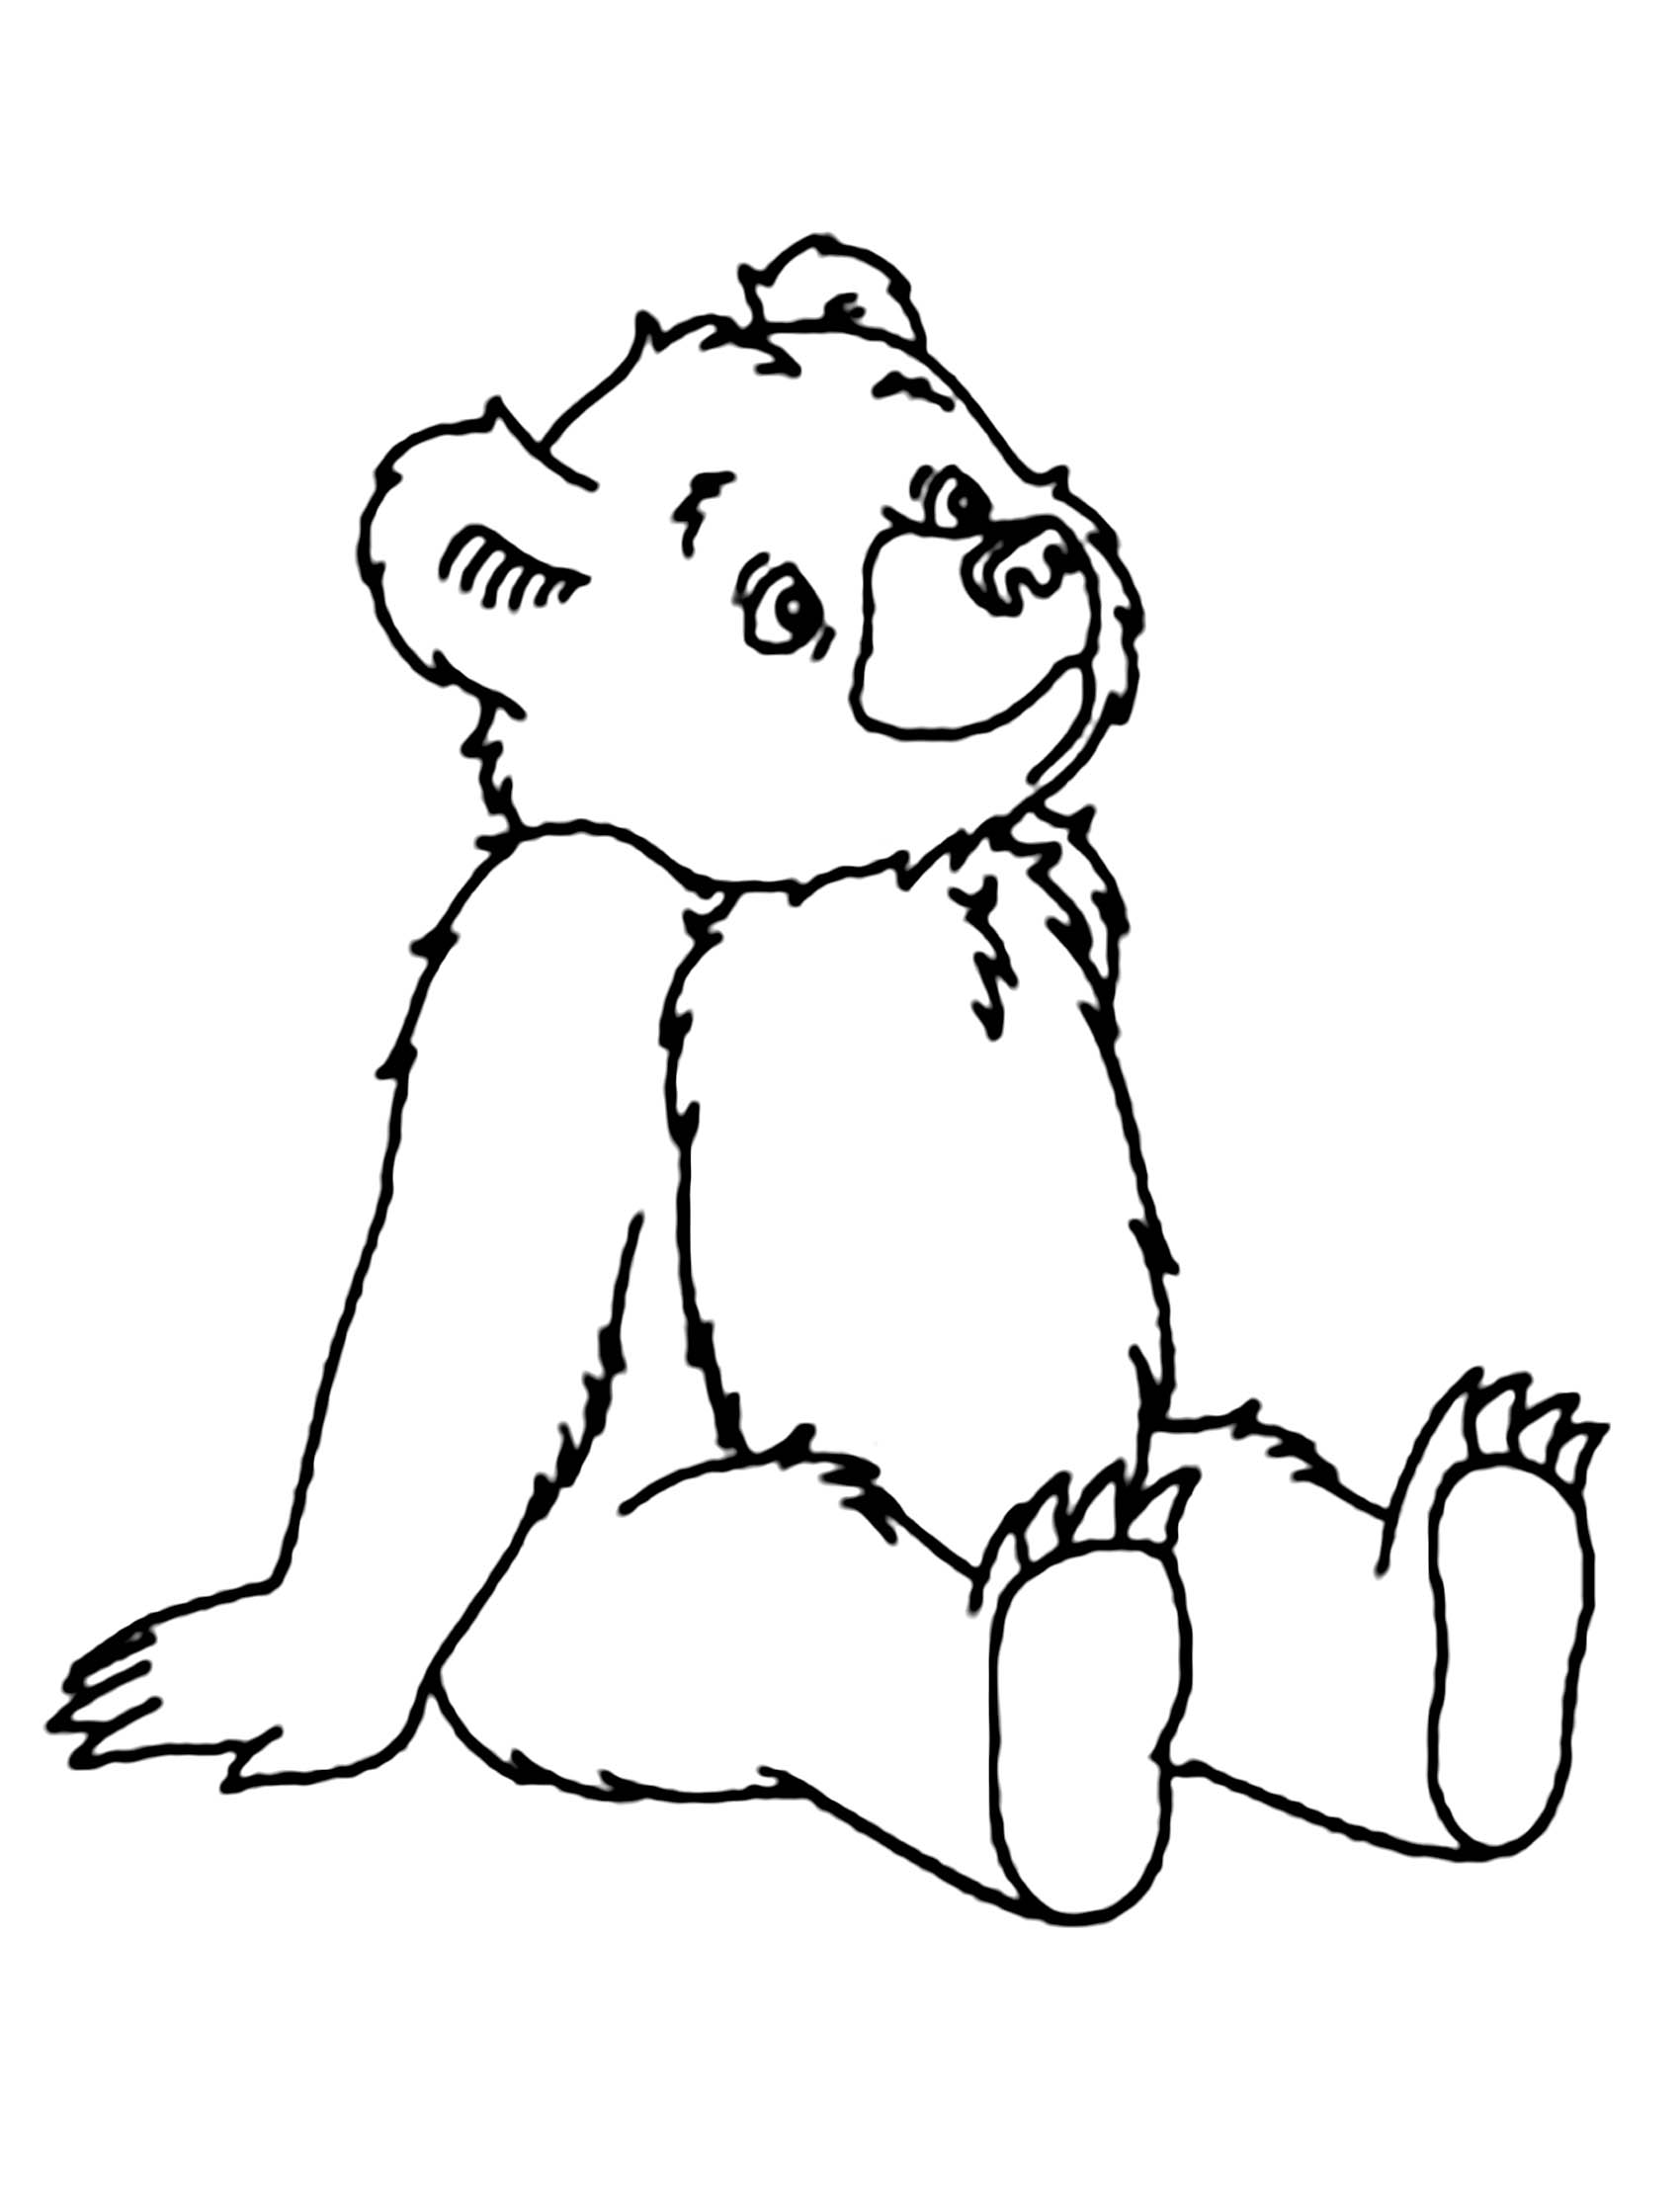 Bears to download - Bears Kids Coloring Pages